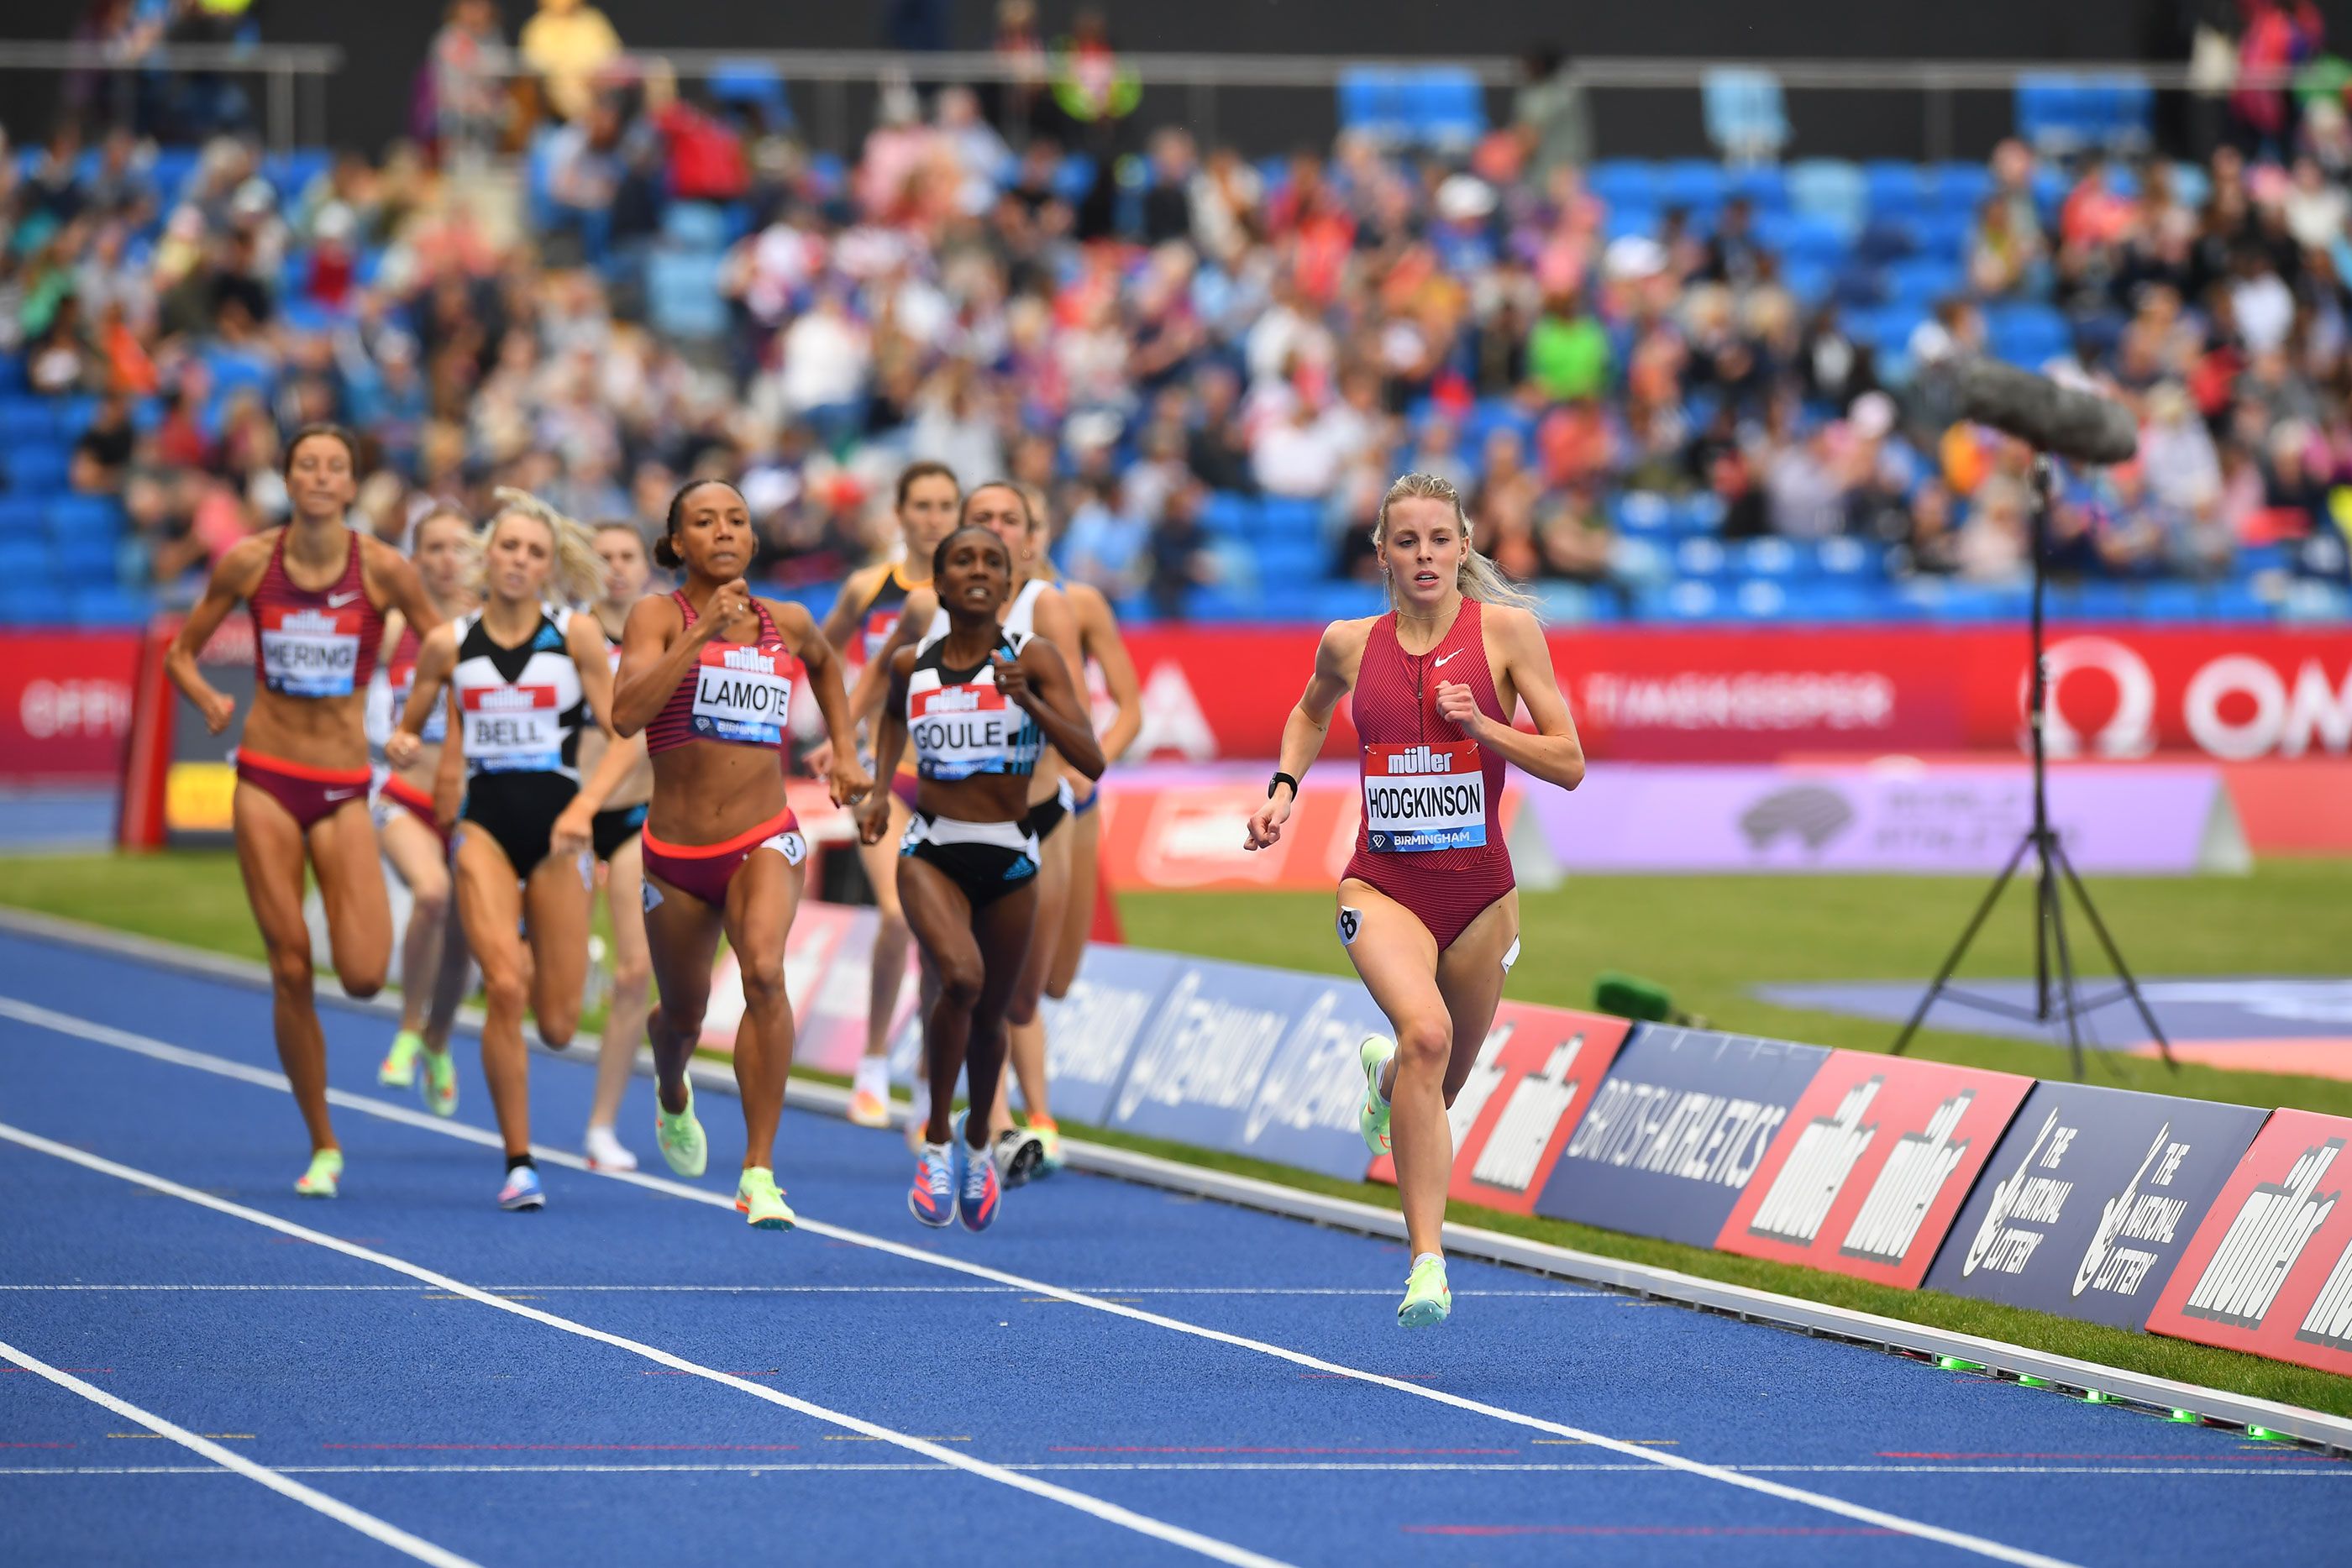 Keely Hodgkinson on her way to 800m victory in Birmingham